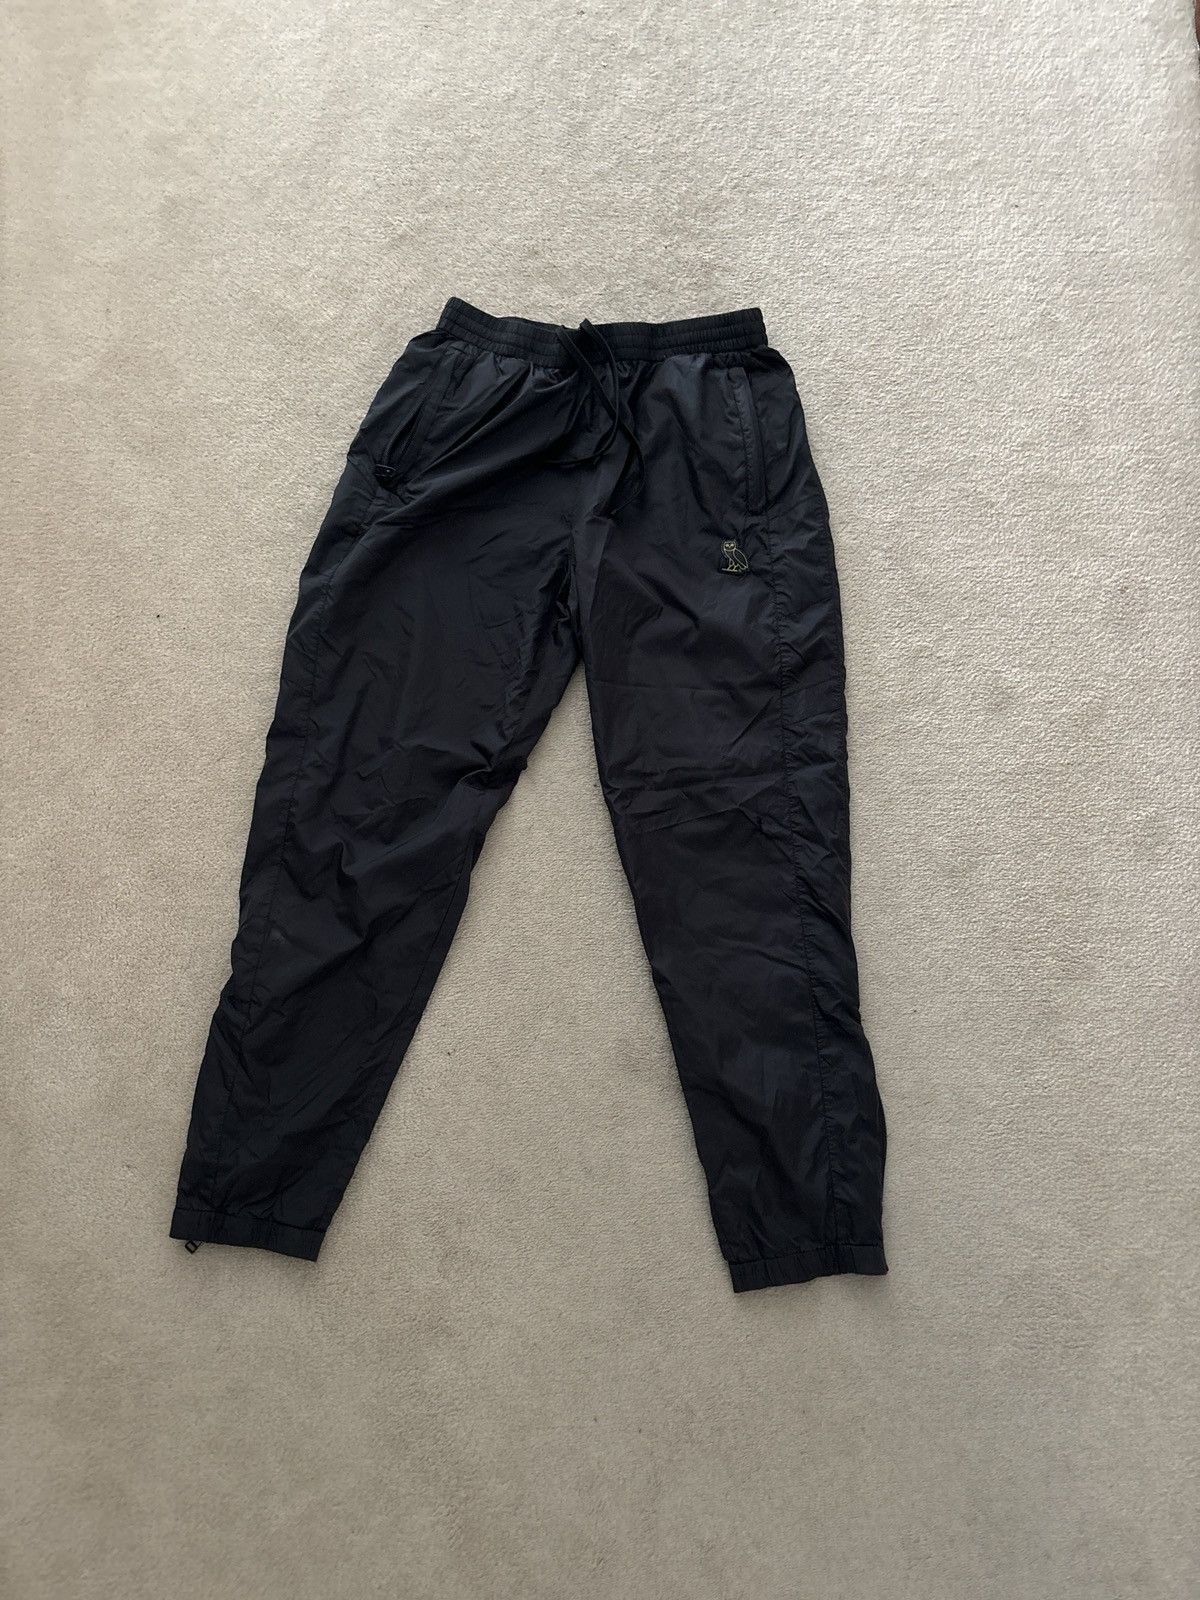 Men's Octobers Very Own Sweatpants & Joggers | Grailed